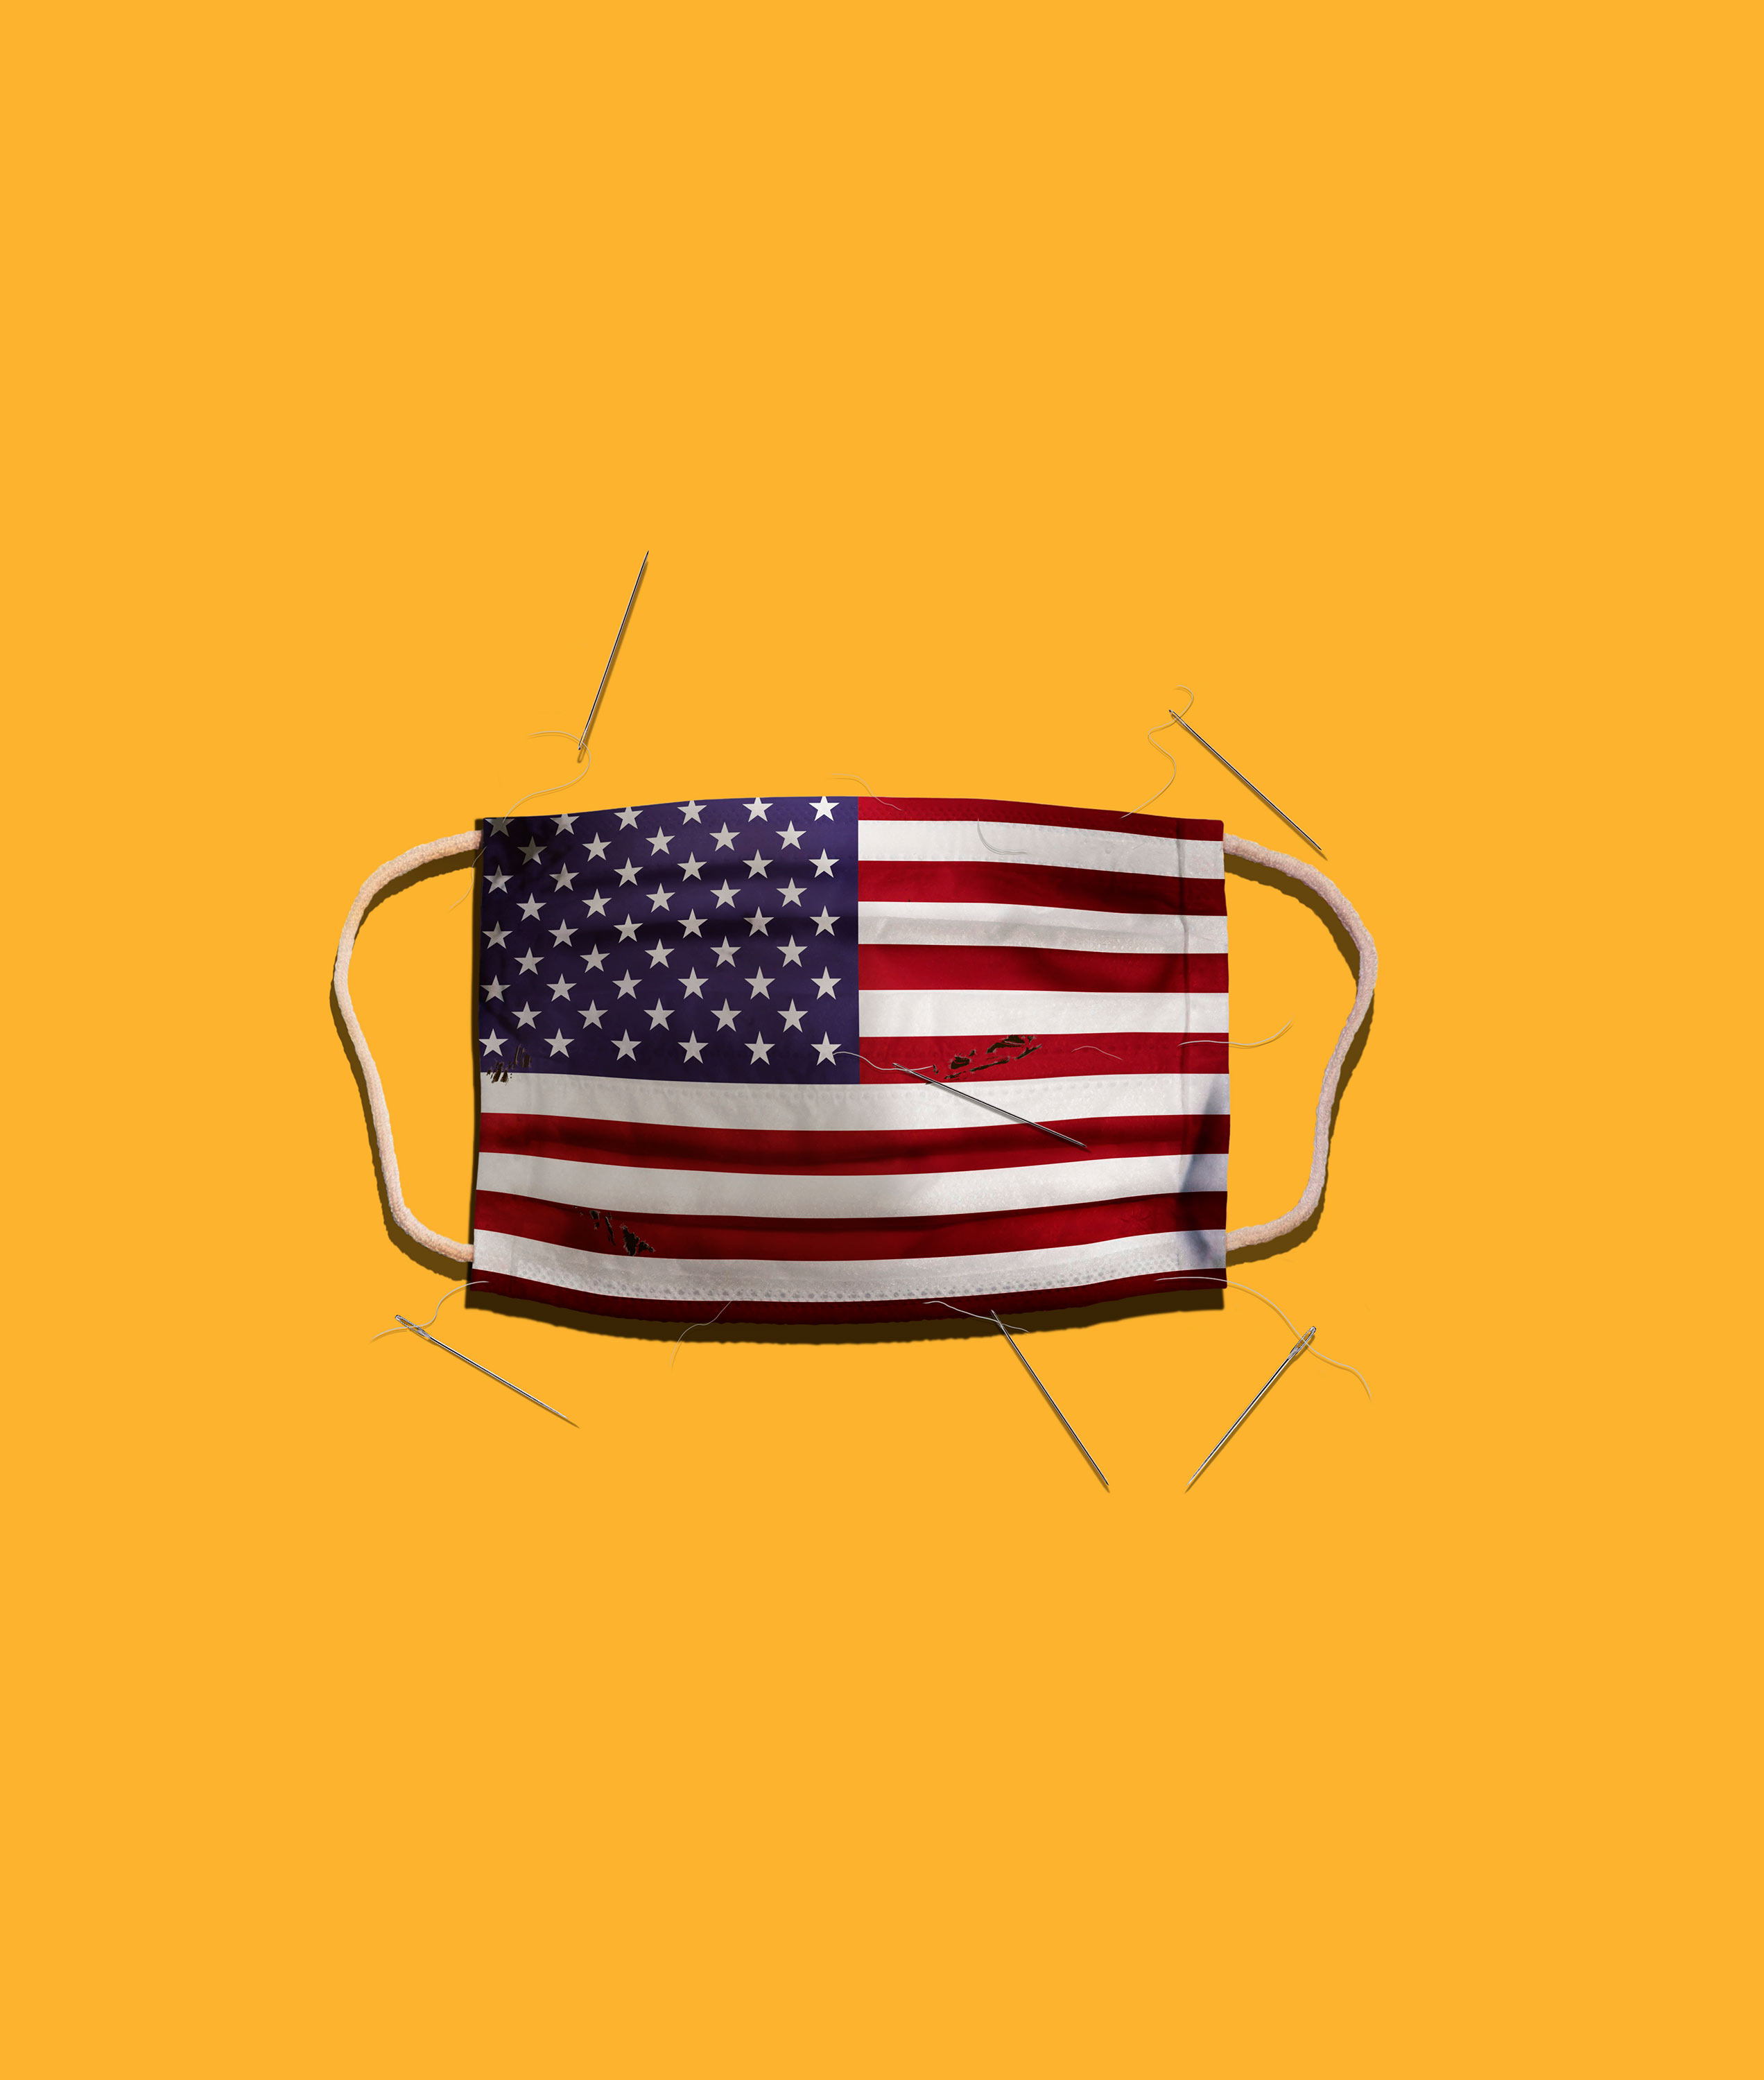 Covid-19 and the geopolitics of American decline | MIT Technology Review